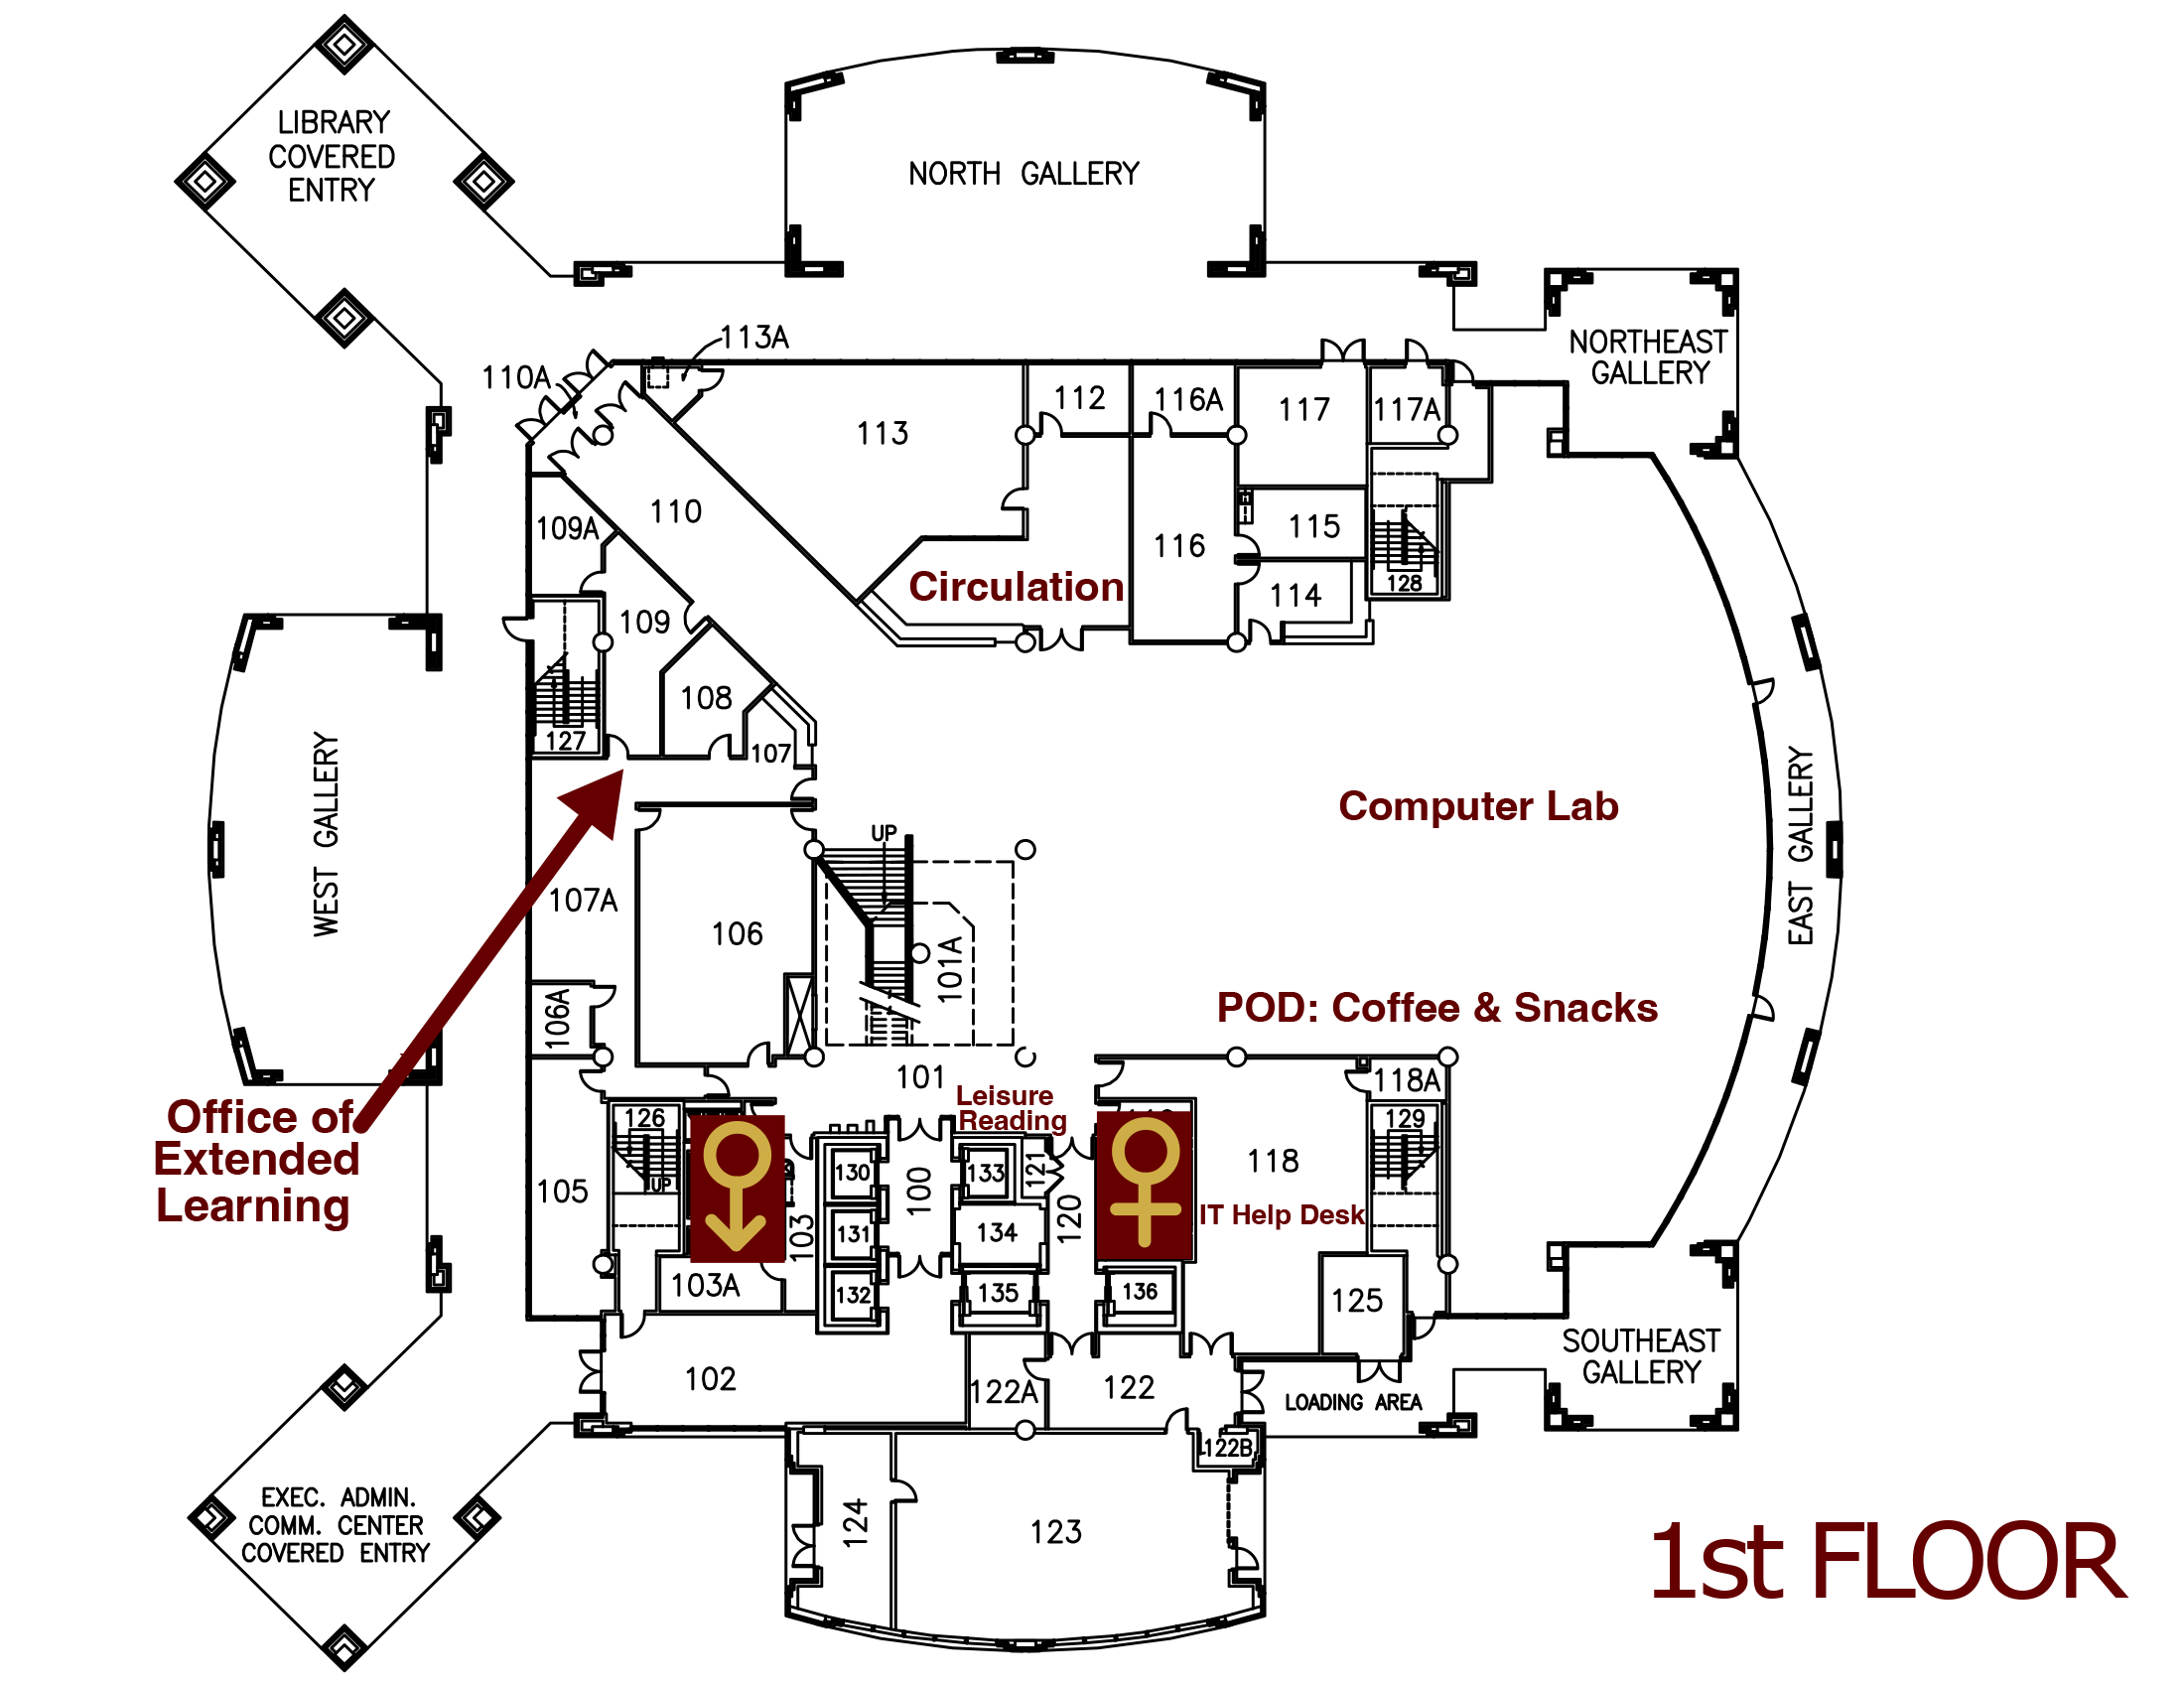 first floor library map see text list below